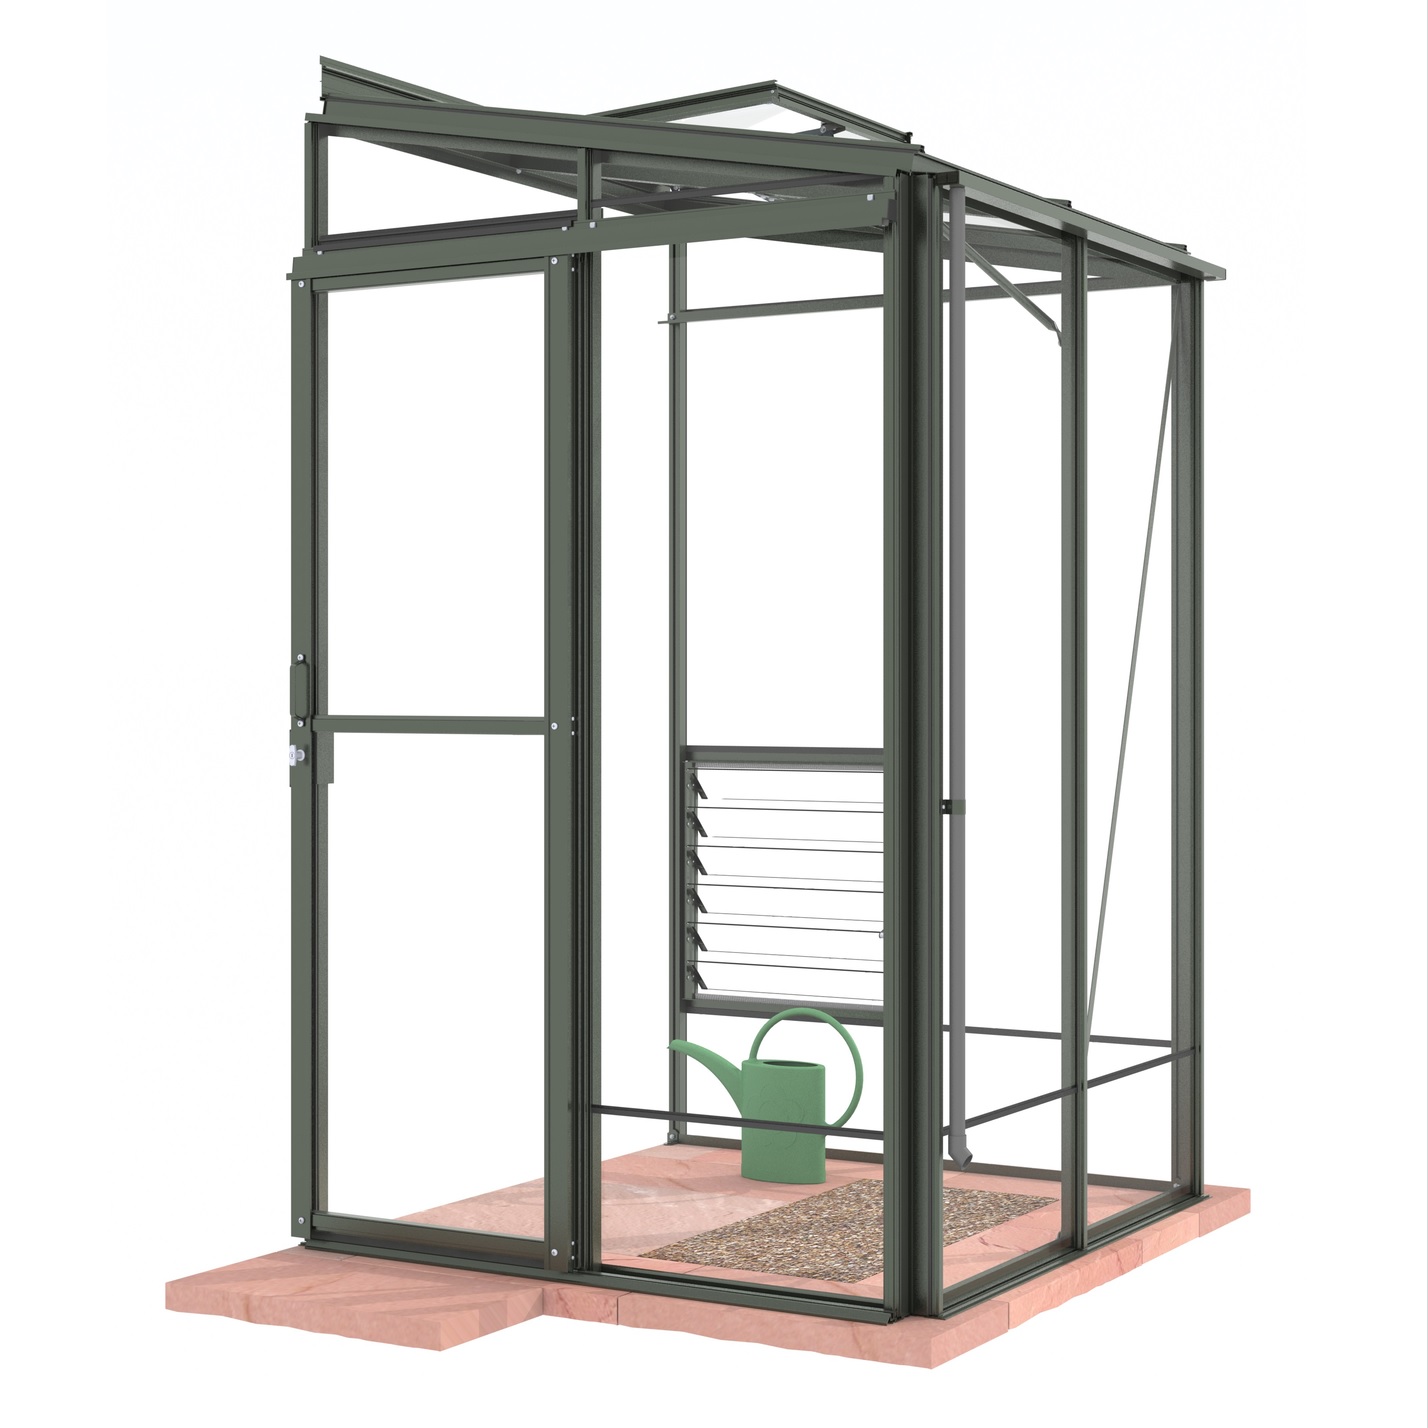 Robinsons 4 x 4 Lean To Greenhouse